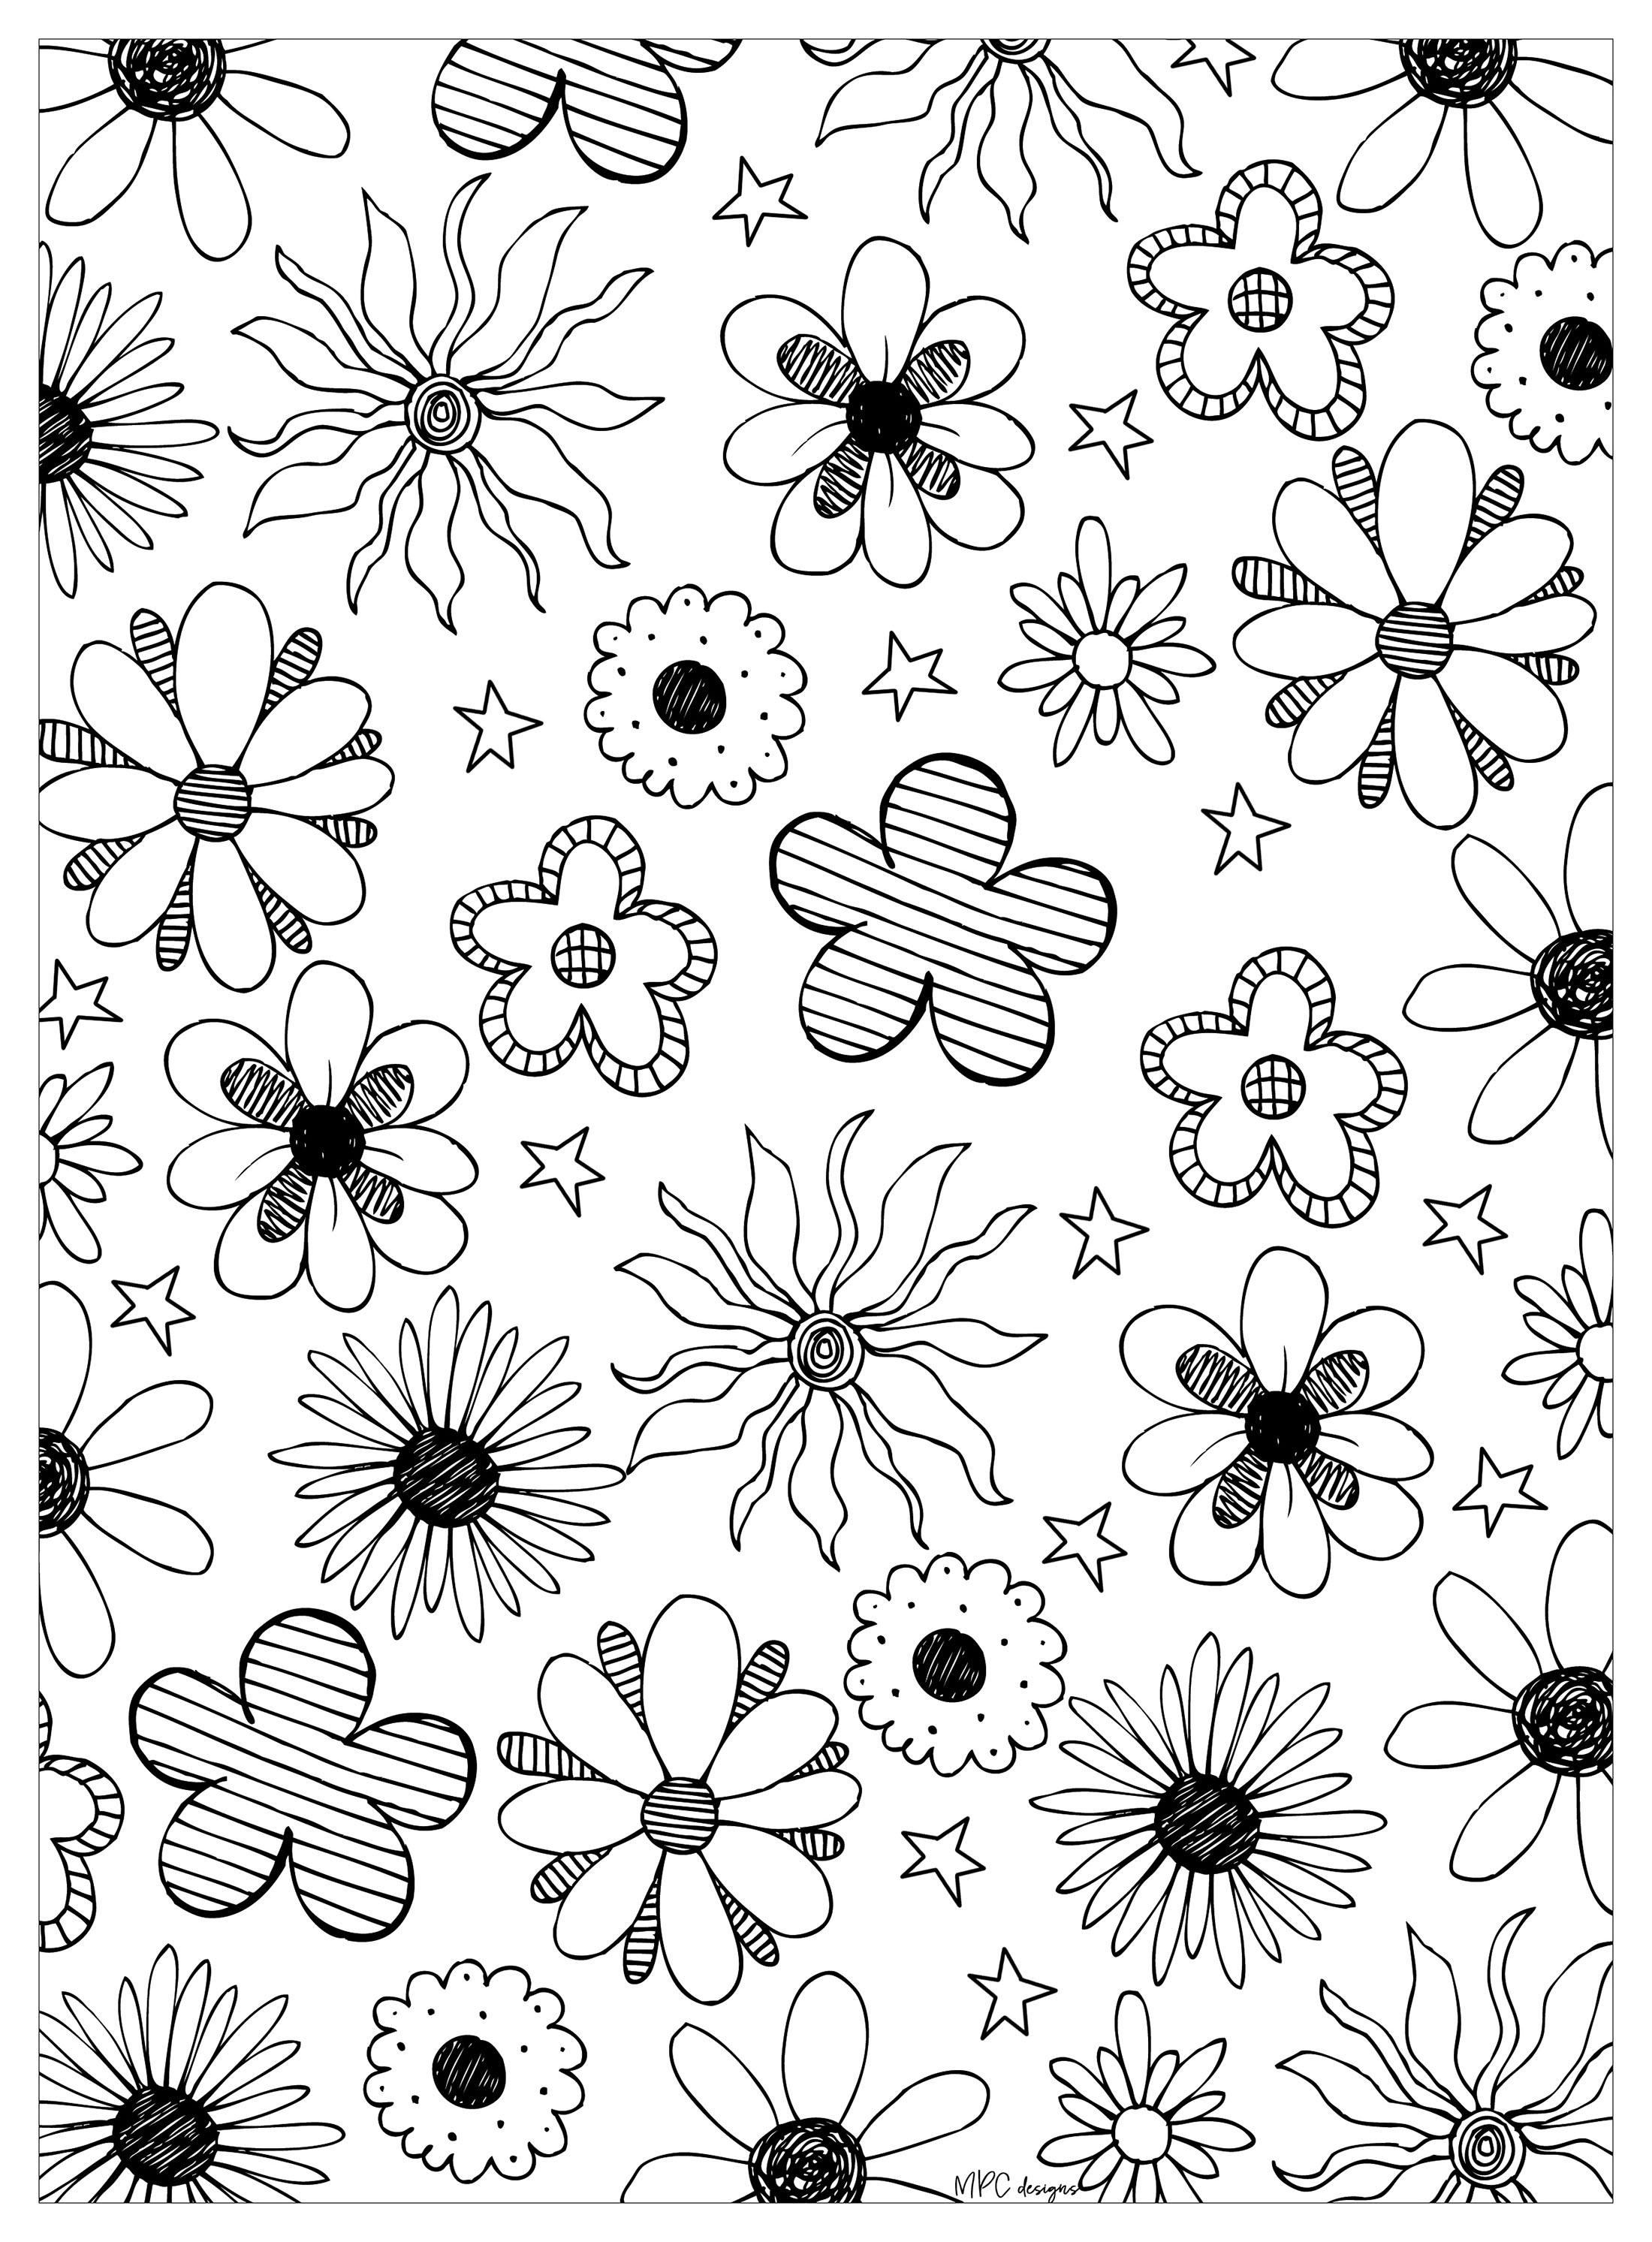 Flowers to color for children - Flowers Kids Coloring Pages